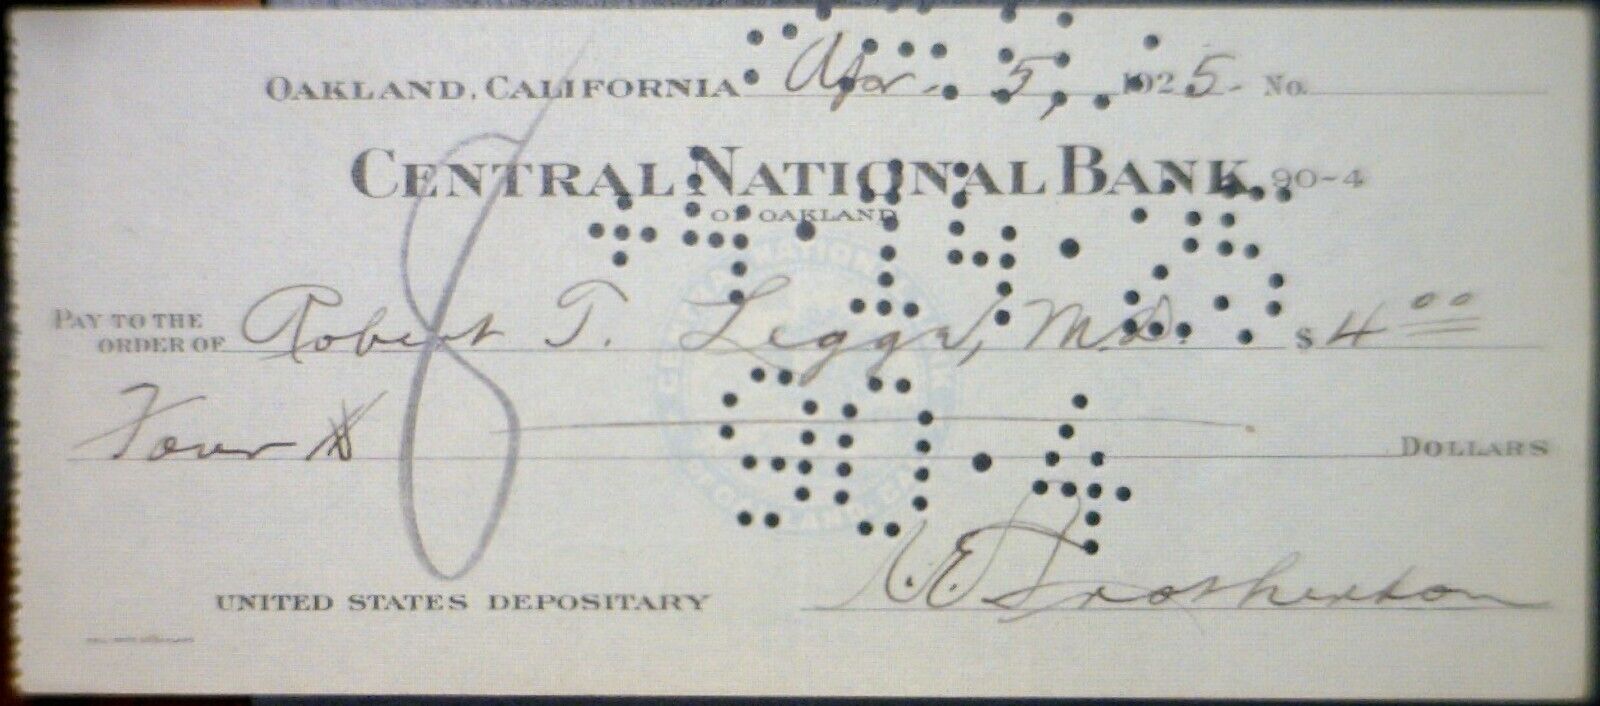 1925 The Central National Bank of OAKLAND CALIFORNIA Check LOT #5   